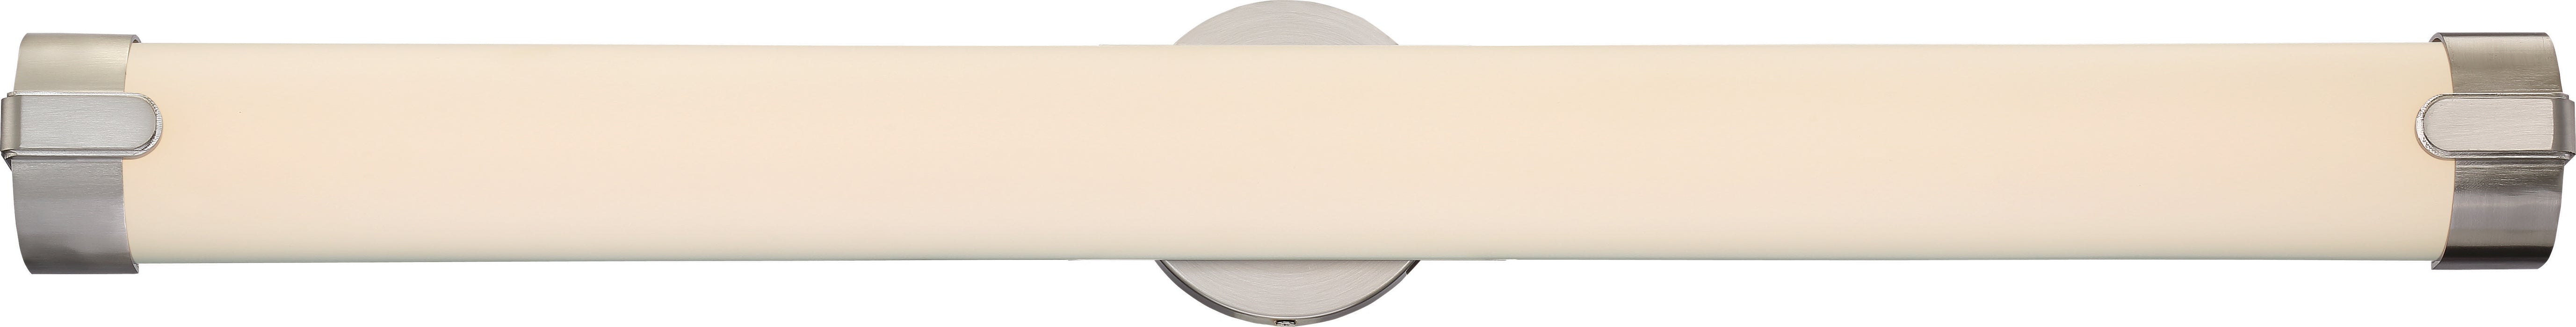 SATCO/NUVO Loop 36 Inch LED Wall Sconce Brushed Nickel Finish White Acrylic Lens (62-925)